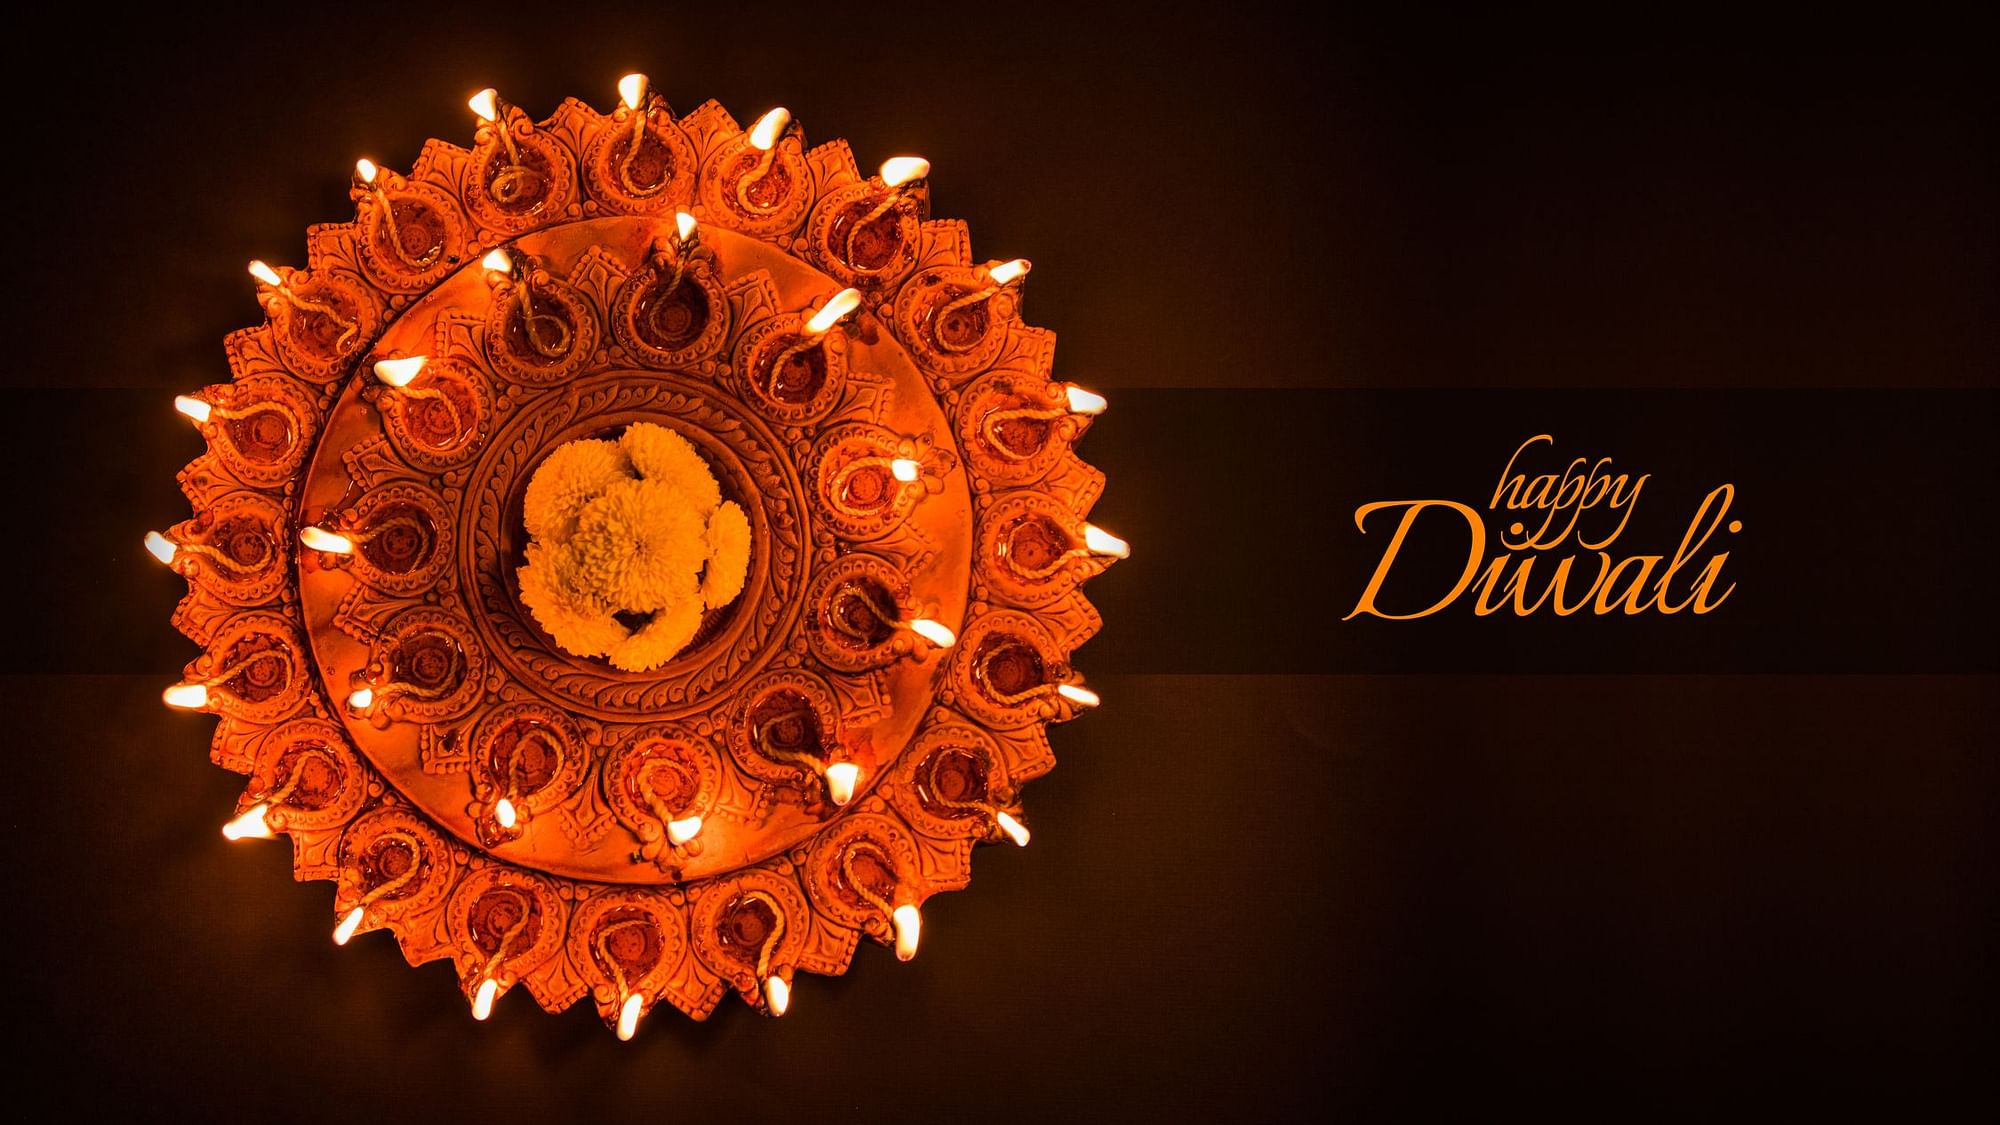 Happy Diwali 2020 Wishes, Images, Quotes, Status, & Greetings to Share